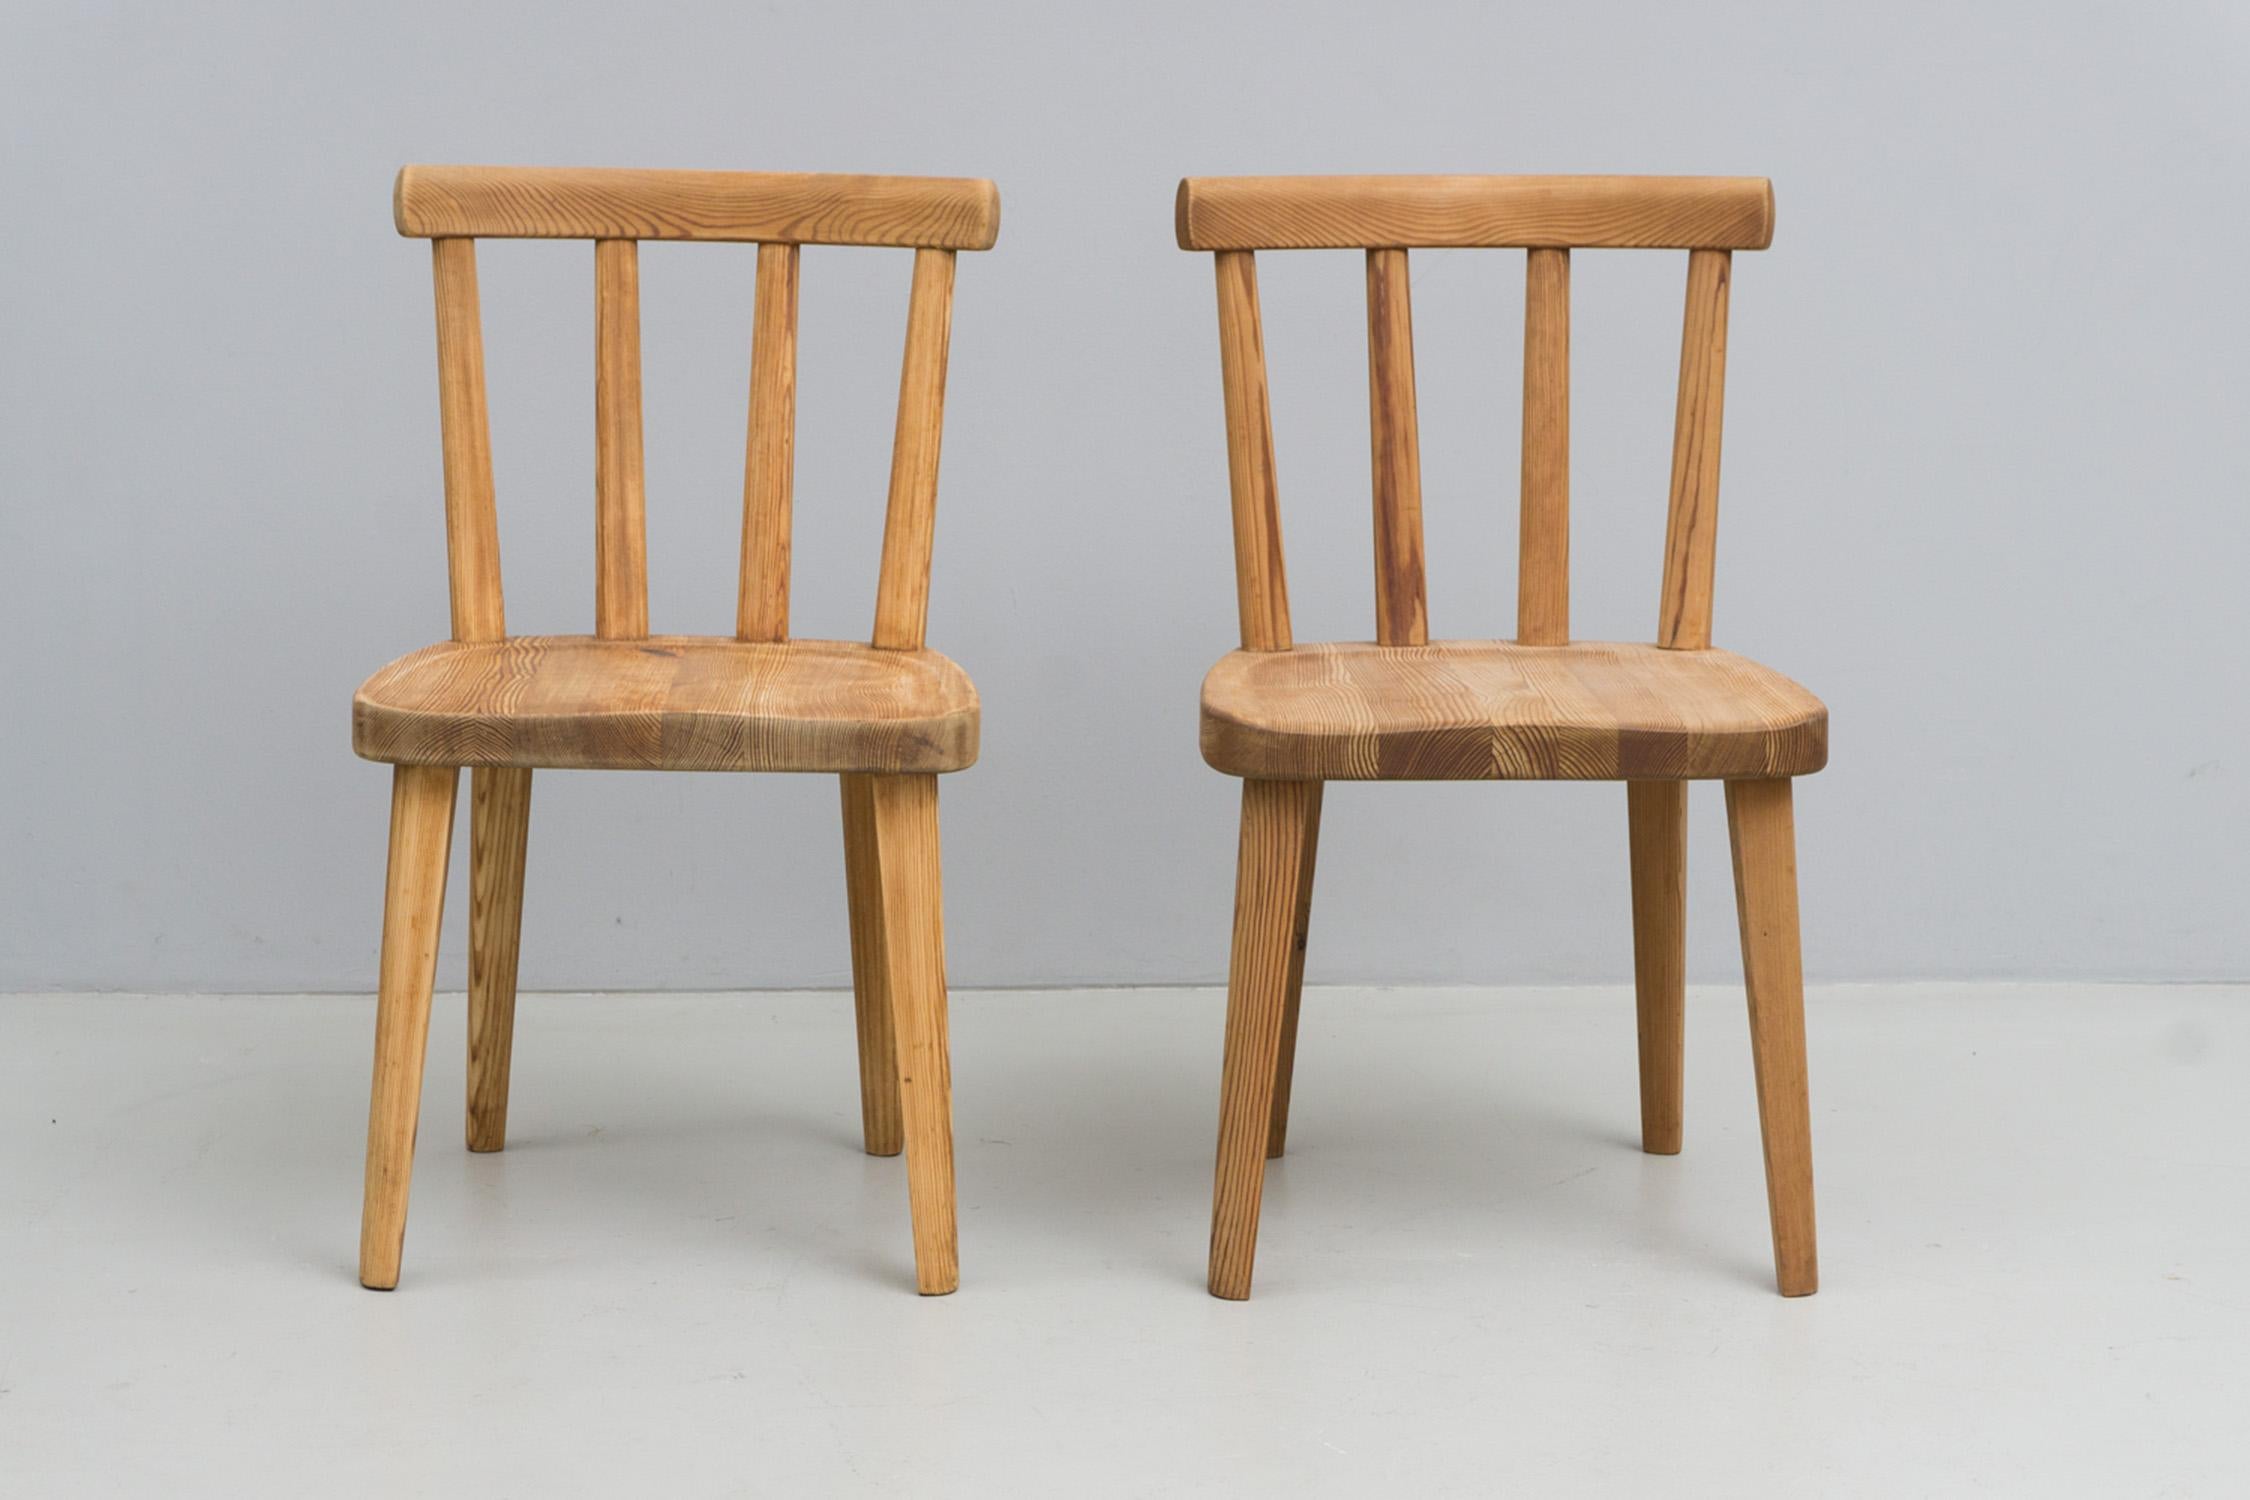 Set of Swedish Pine Wood Chairs, 'Uto' by Axel Einar Hjorth, 1930 In Good Condition For Sale In Berlin, DE